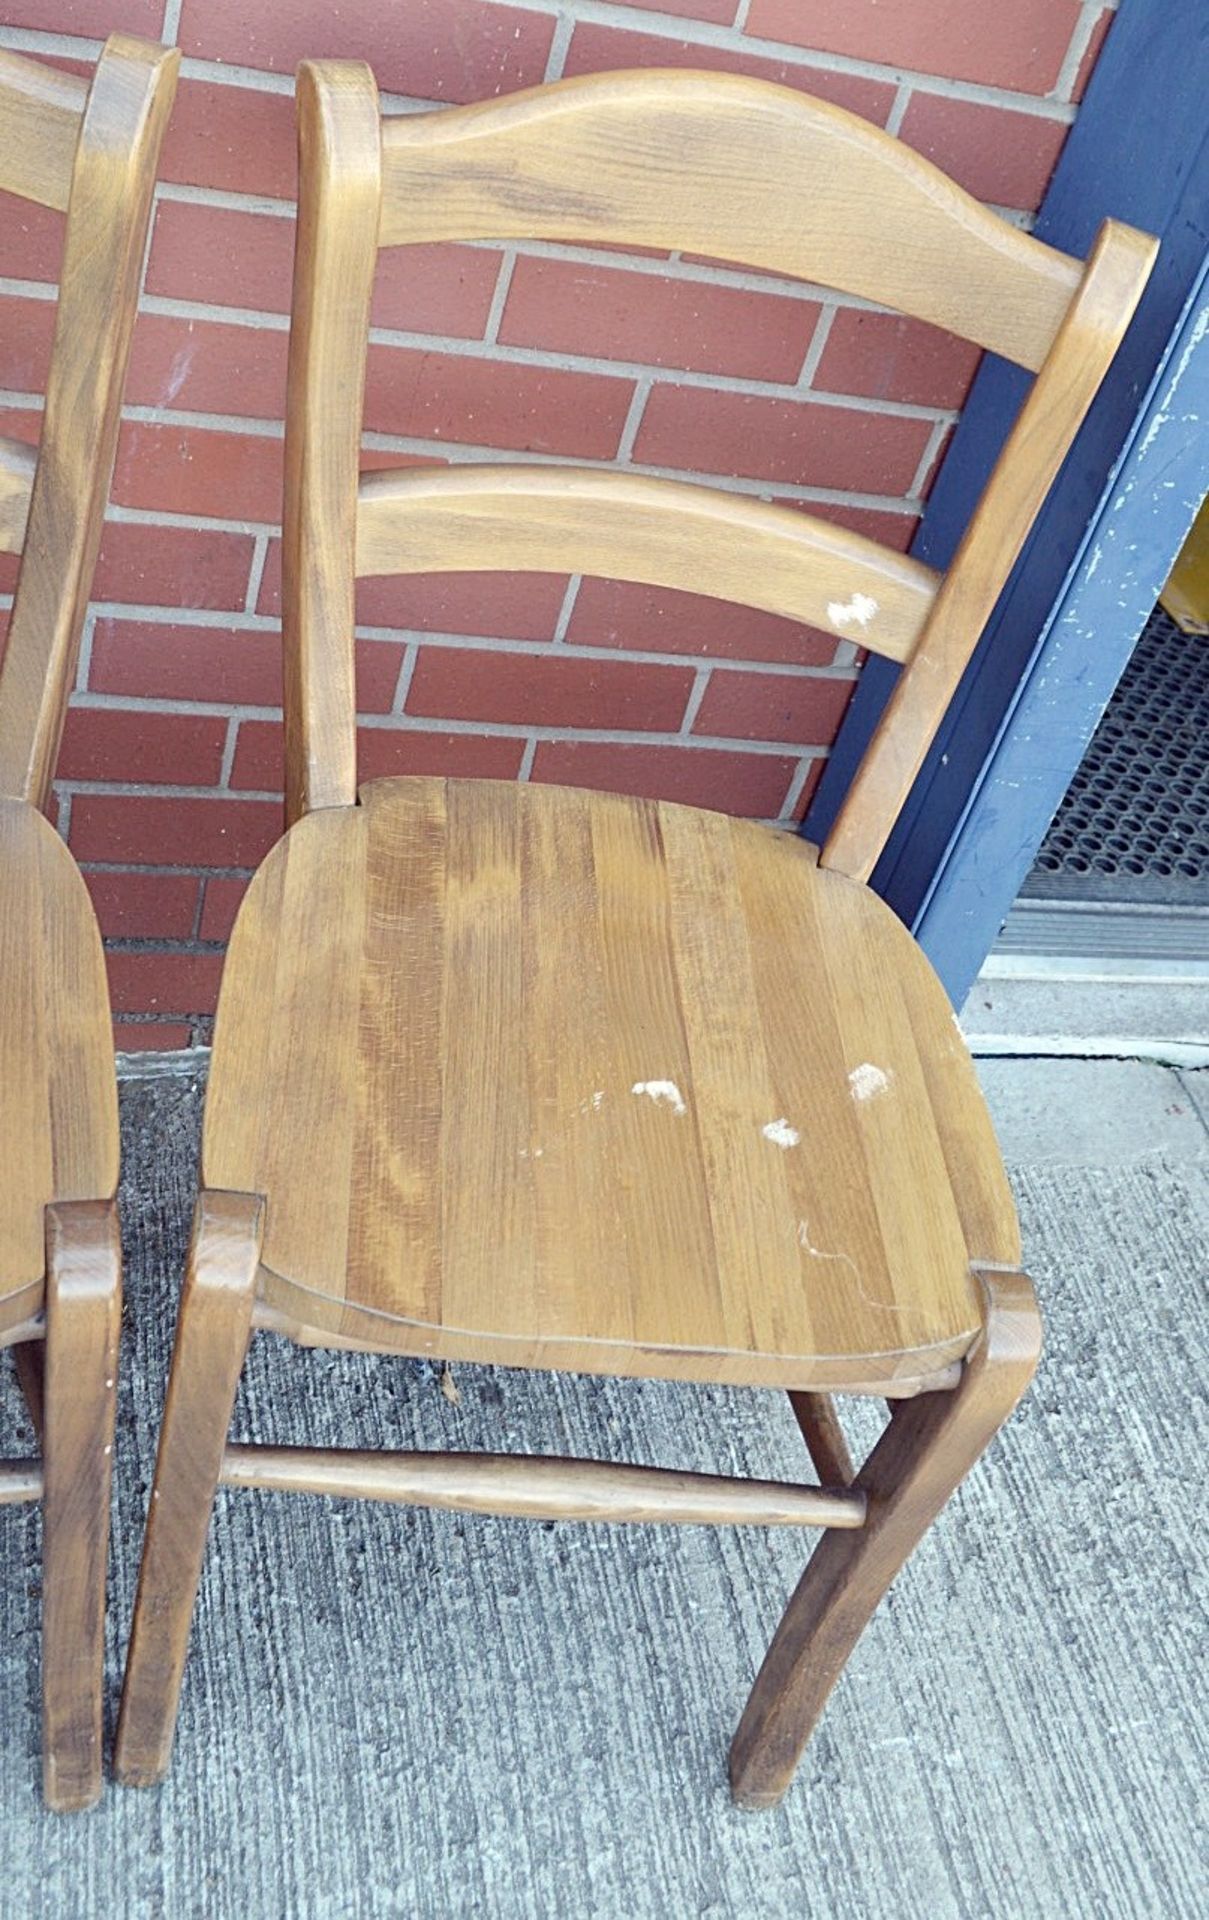 3 x Matching Sturdy Solid Wood Chairs With An Attractive Varnished Finish - Dimensions: H90 x W47 - Image 6 of 6